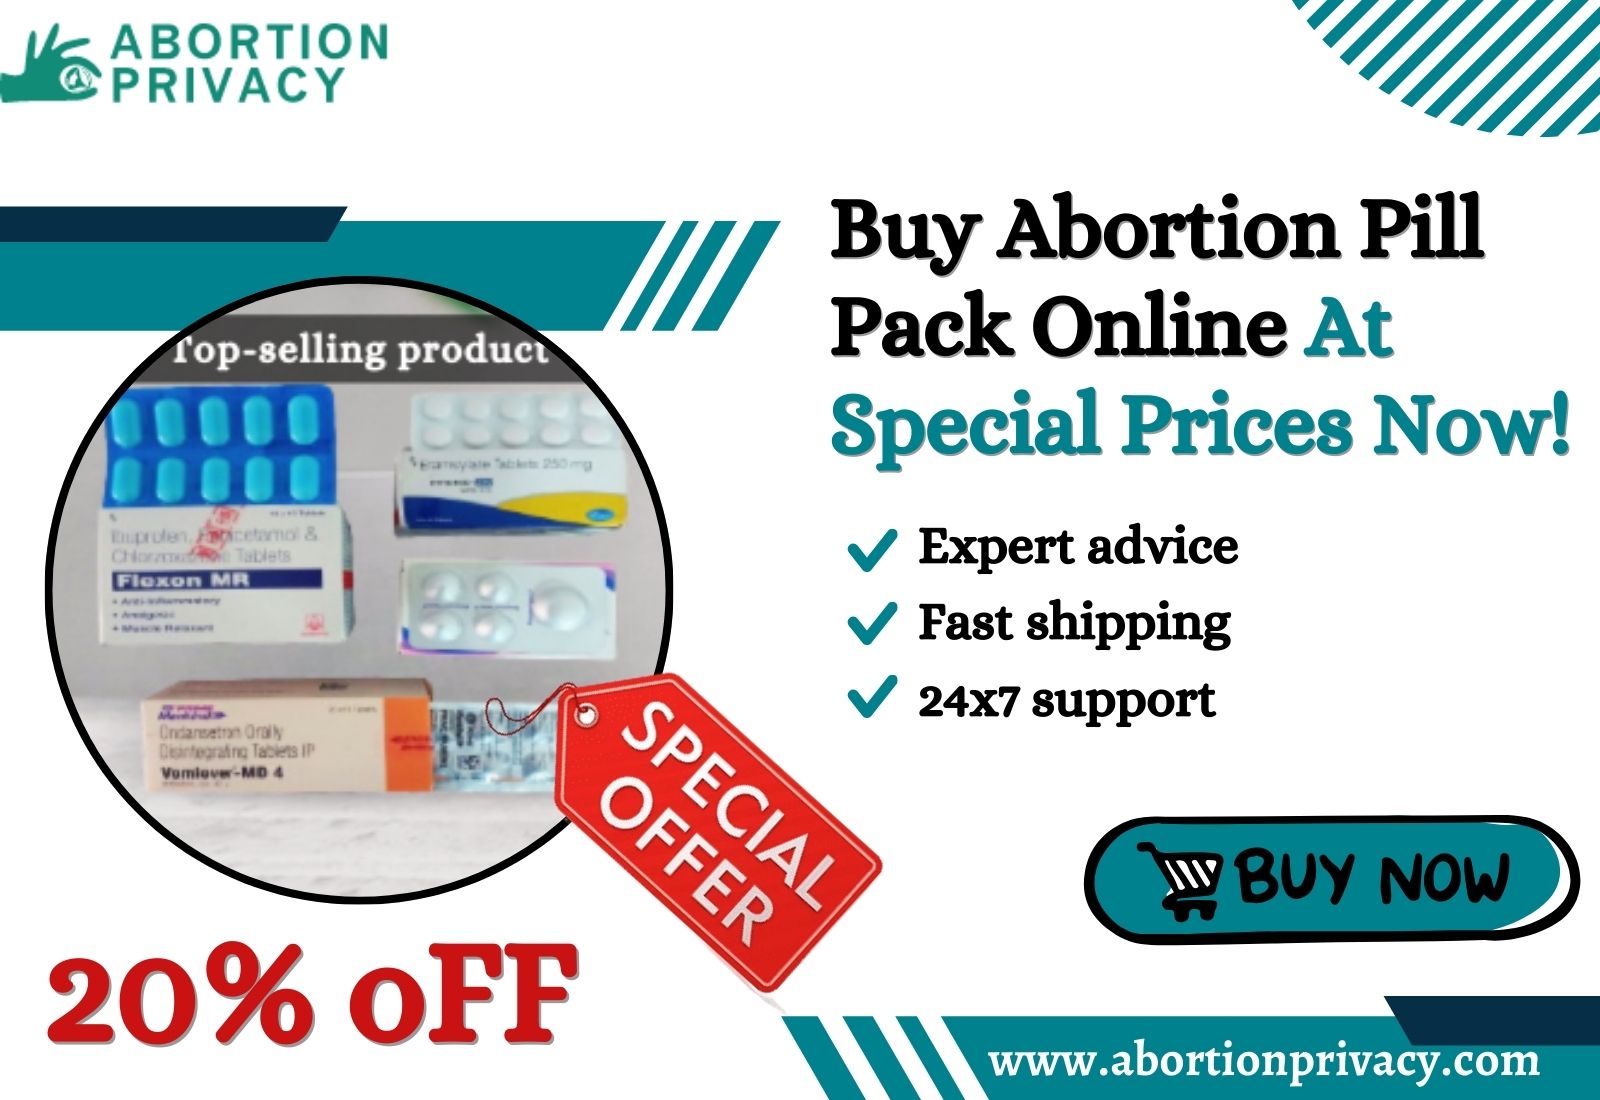 Buy Abortion Pill Pack Online At Special Prices Now! - Texas - San Antonio ID1548577